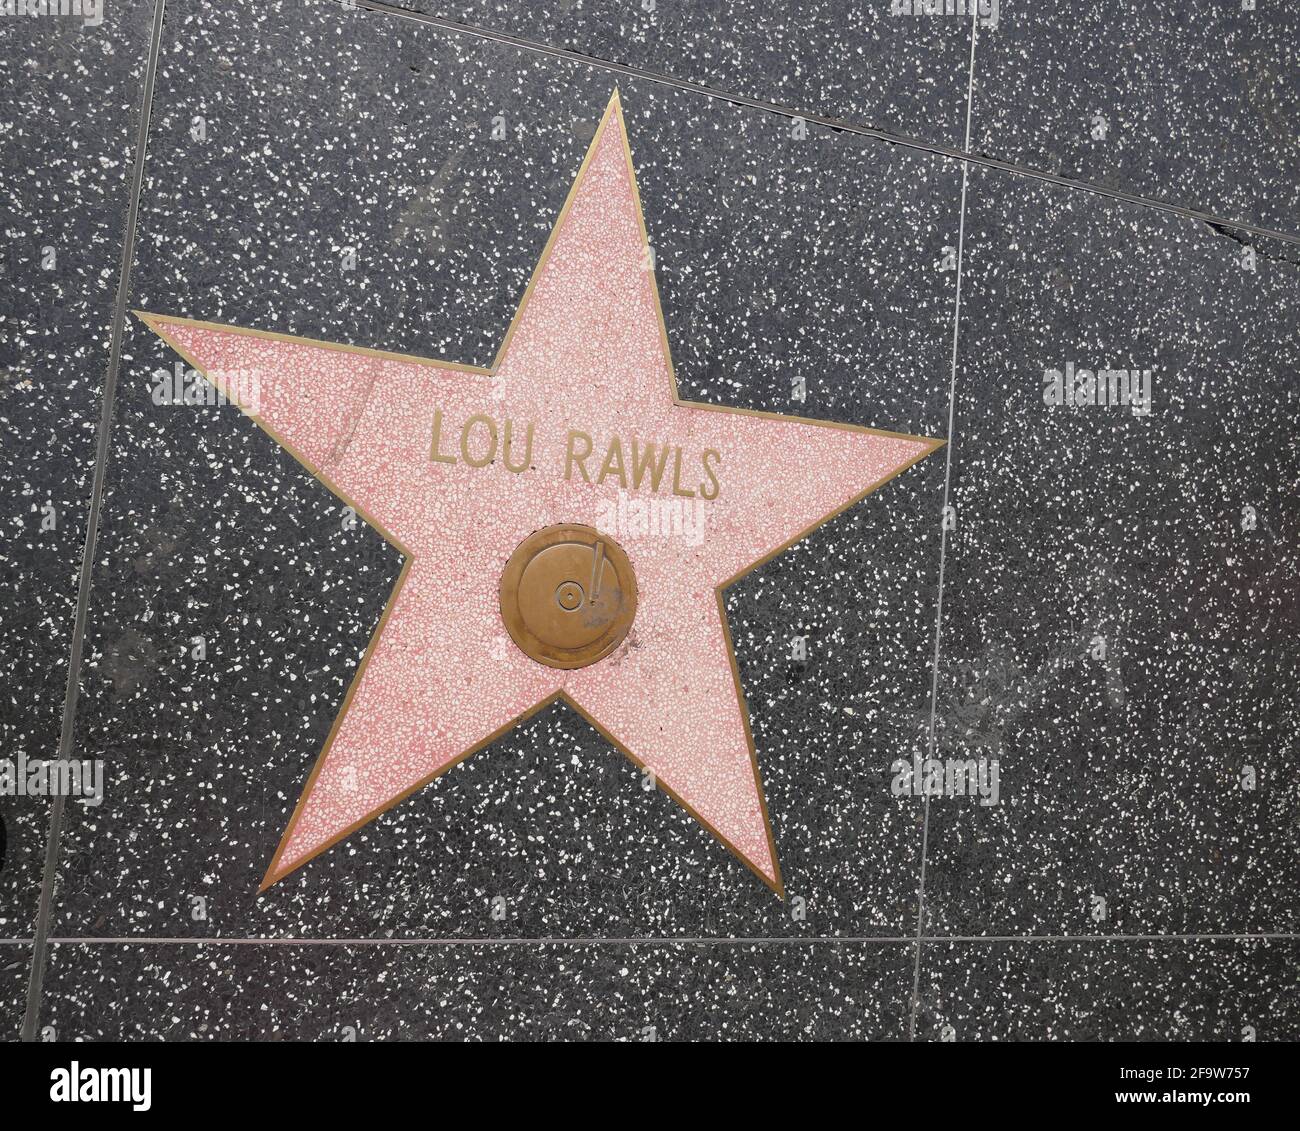 Hollywood, California, USA 17th April 2021 A general view of atmosphere of singer Lou Rawls Star on the Hollywood Walk of Fame on April 17, 2021 in Hollywood, California, USA. Photo by Barry King/Alamy Stock Photo Stock Photo